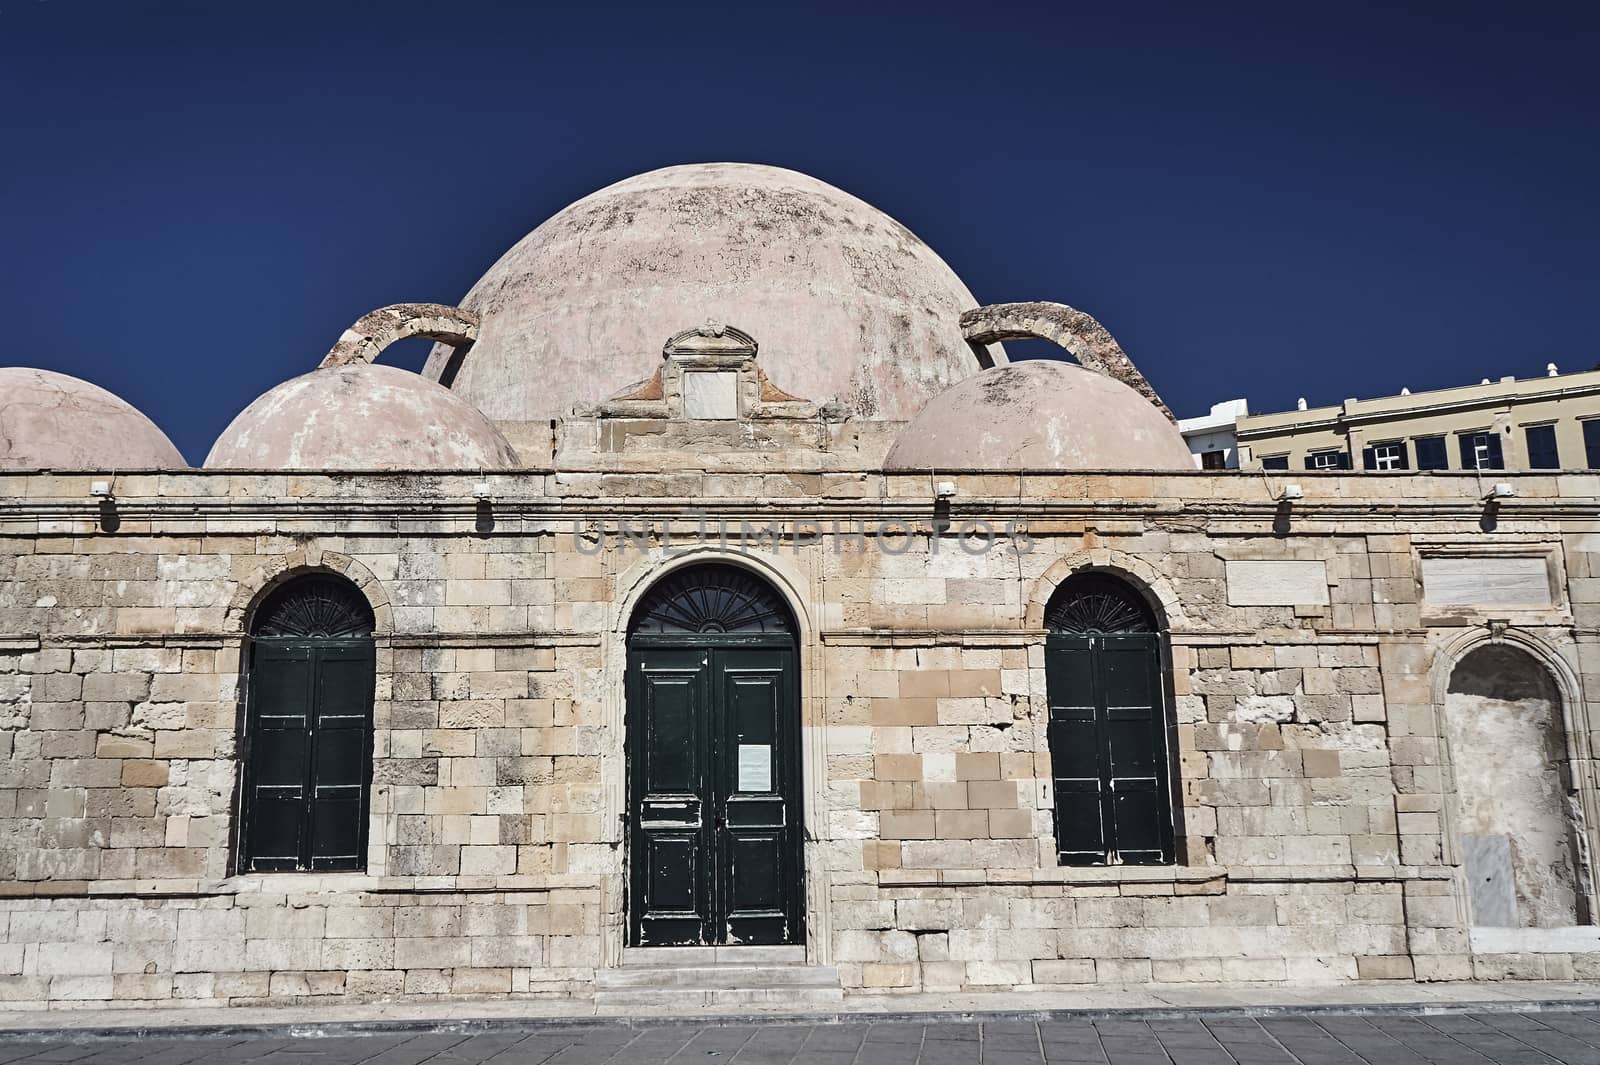 Dome of the mosque on the island of Crete, Greece